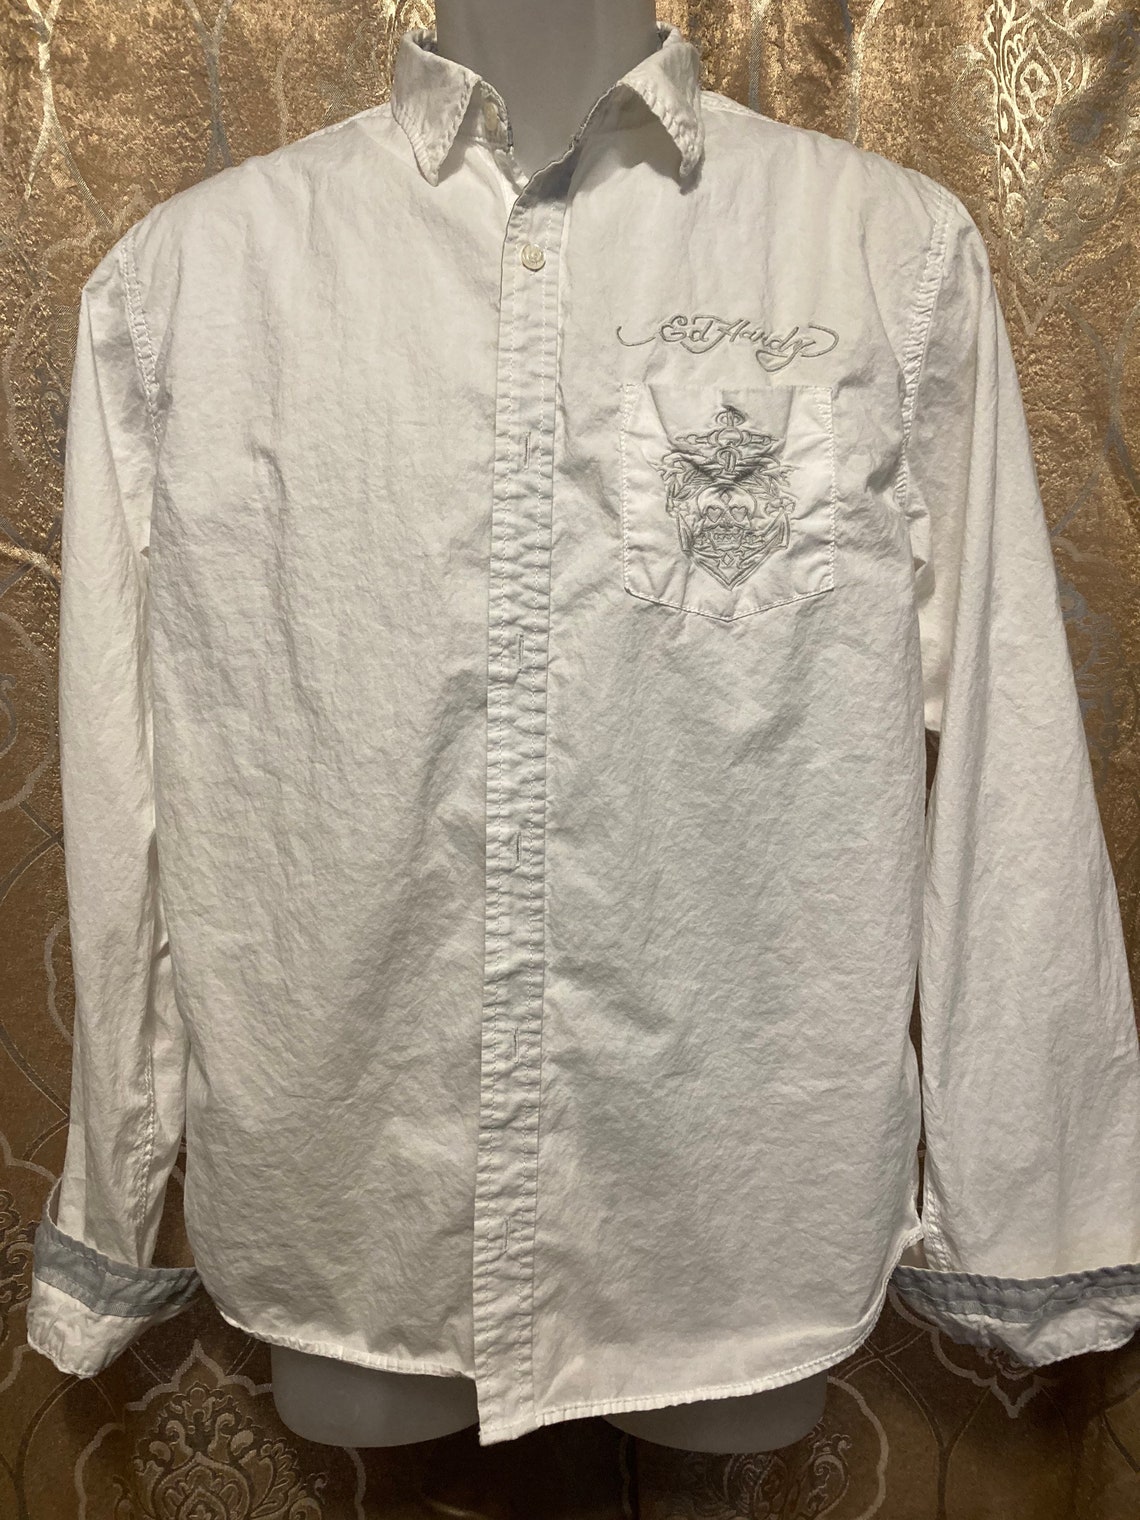 ED HARDY White vintage Button up dress shirt with logo on | Etsy